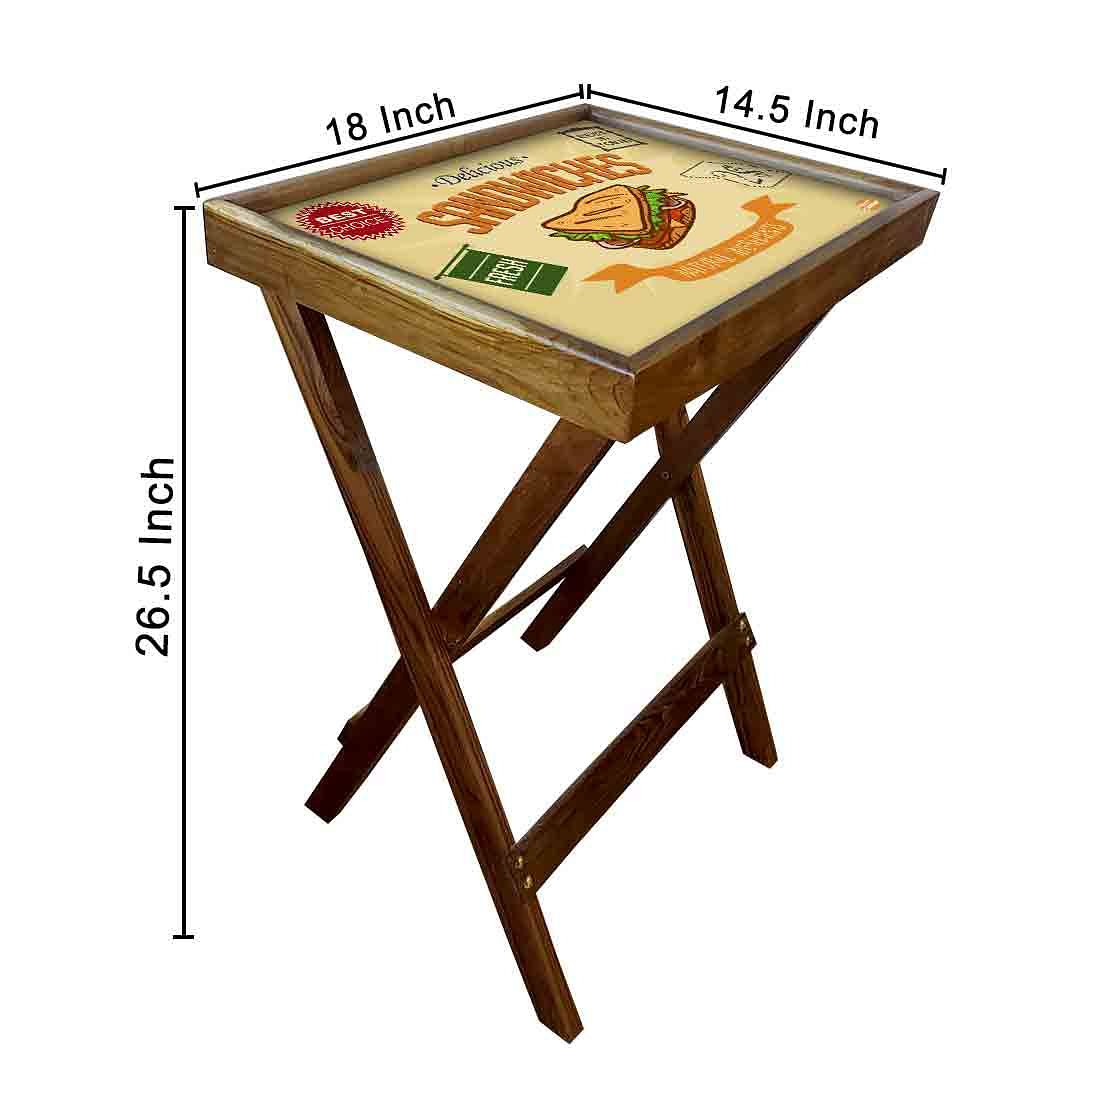 Wooden Folding Long Table for Serving Snacks Tables - Sandwiches Nutcase